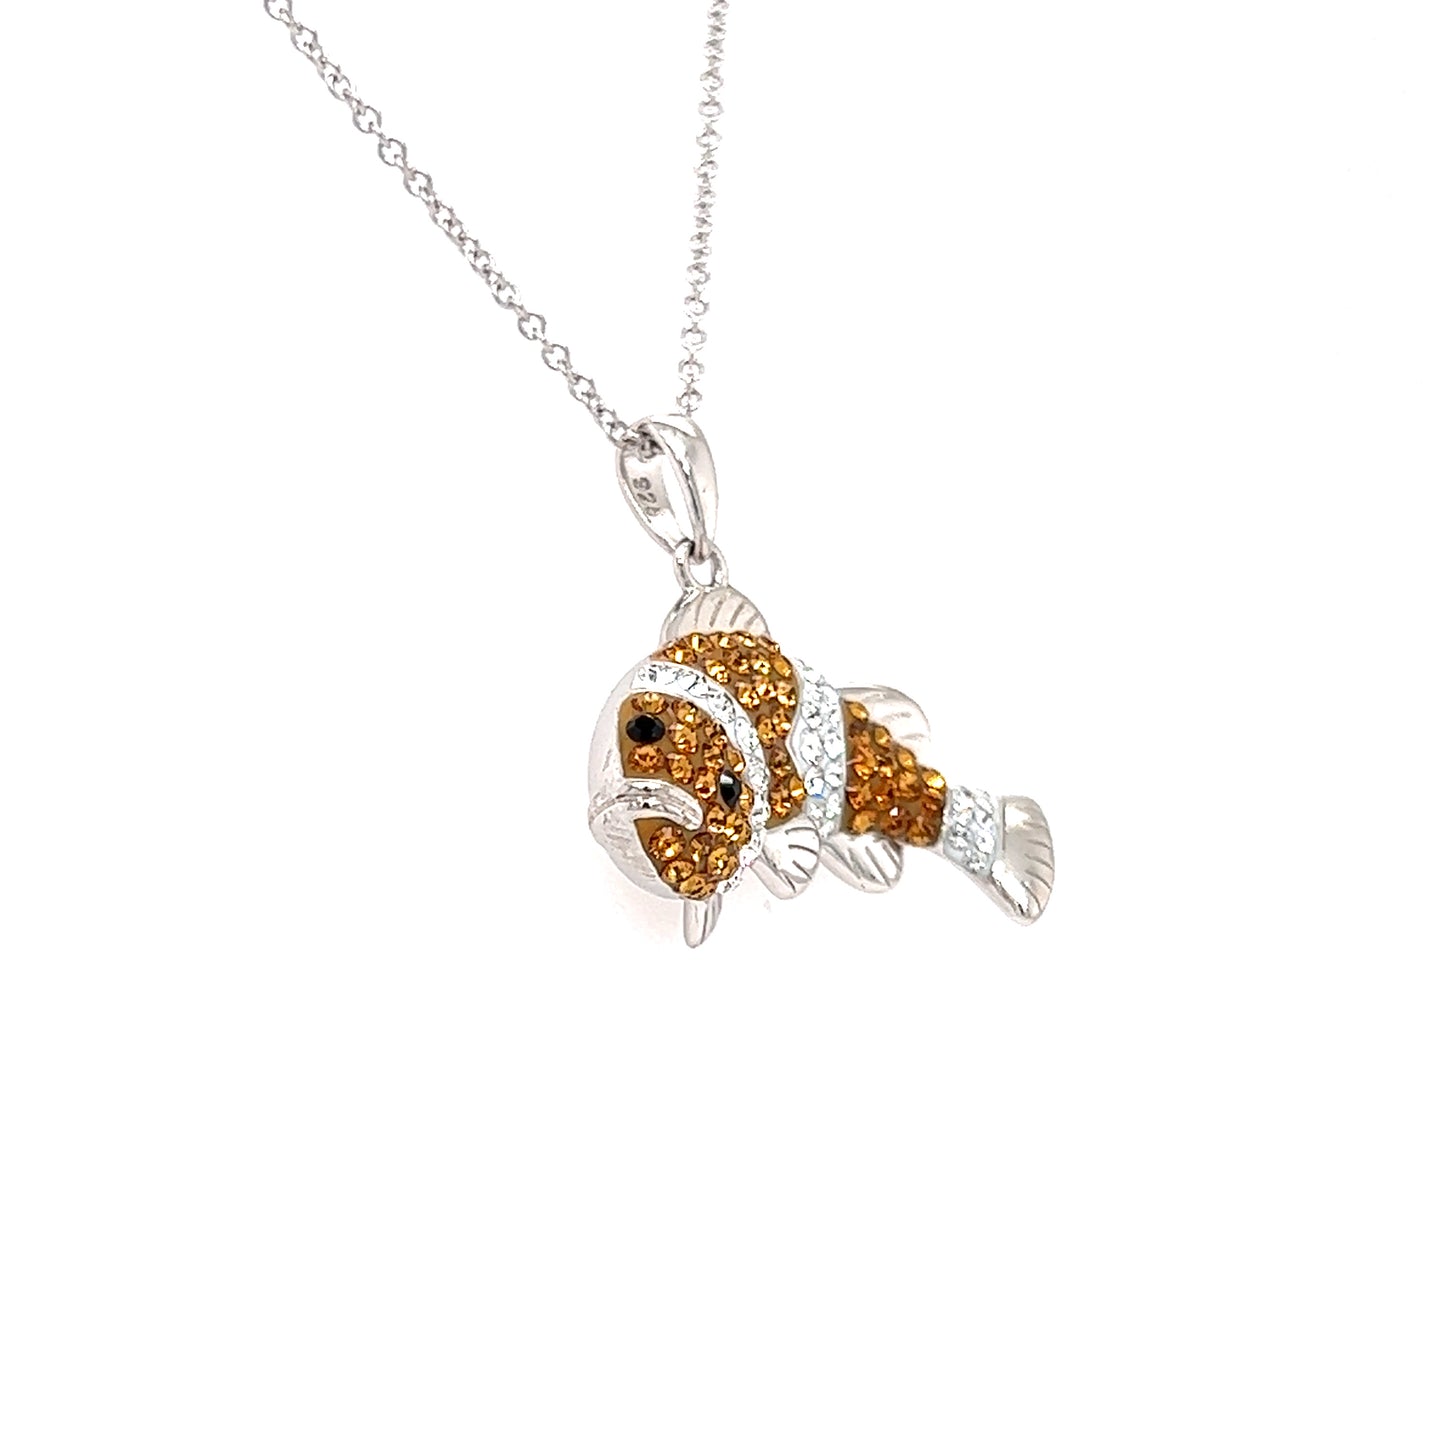 Clownfish Necklace with Orange and White Crystals in Sterling Silver Left Side View